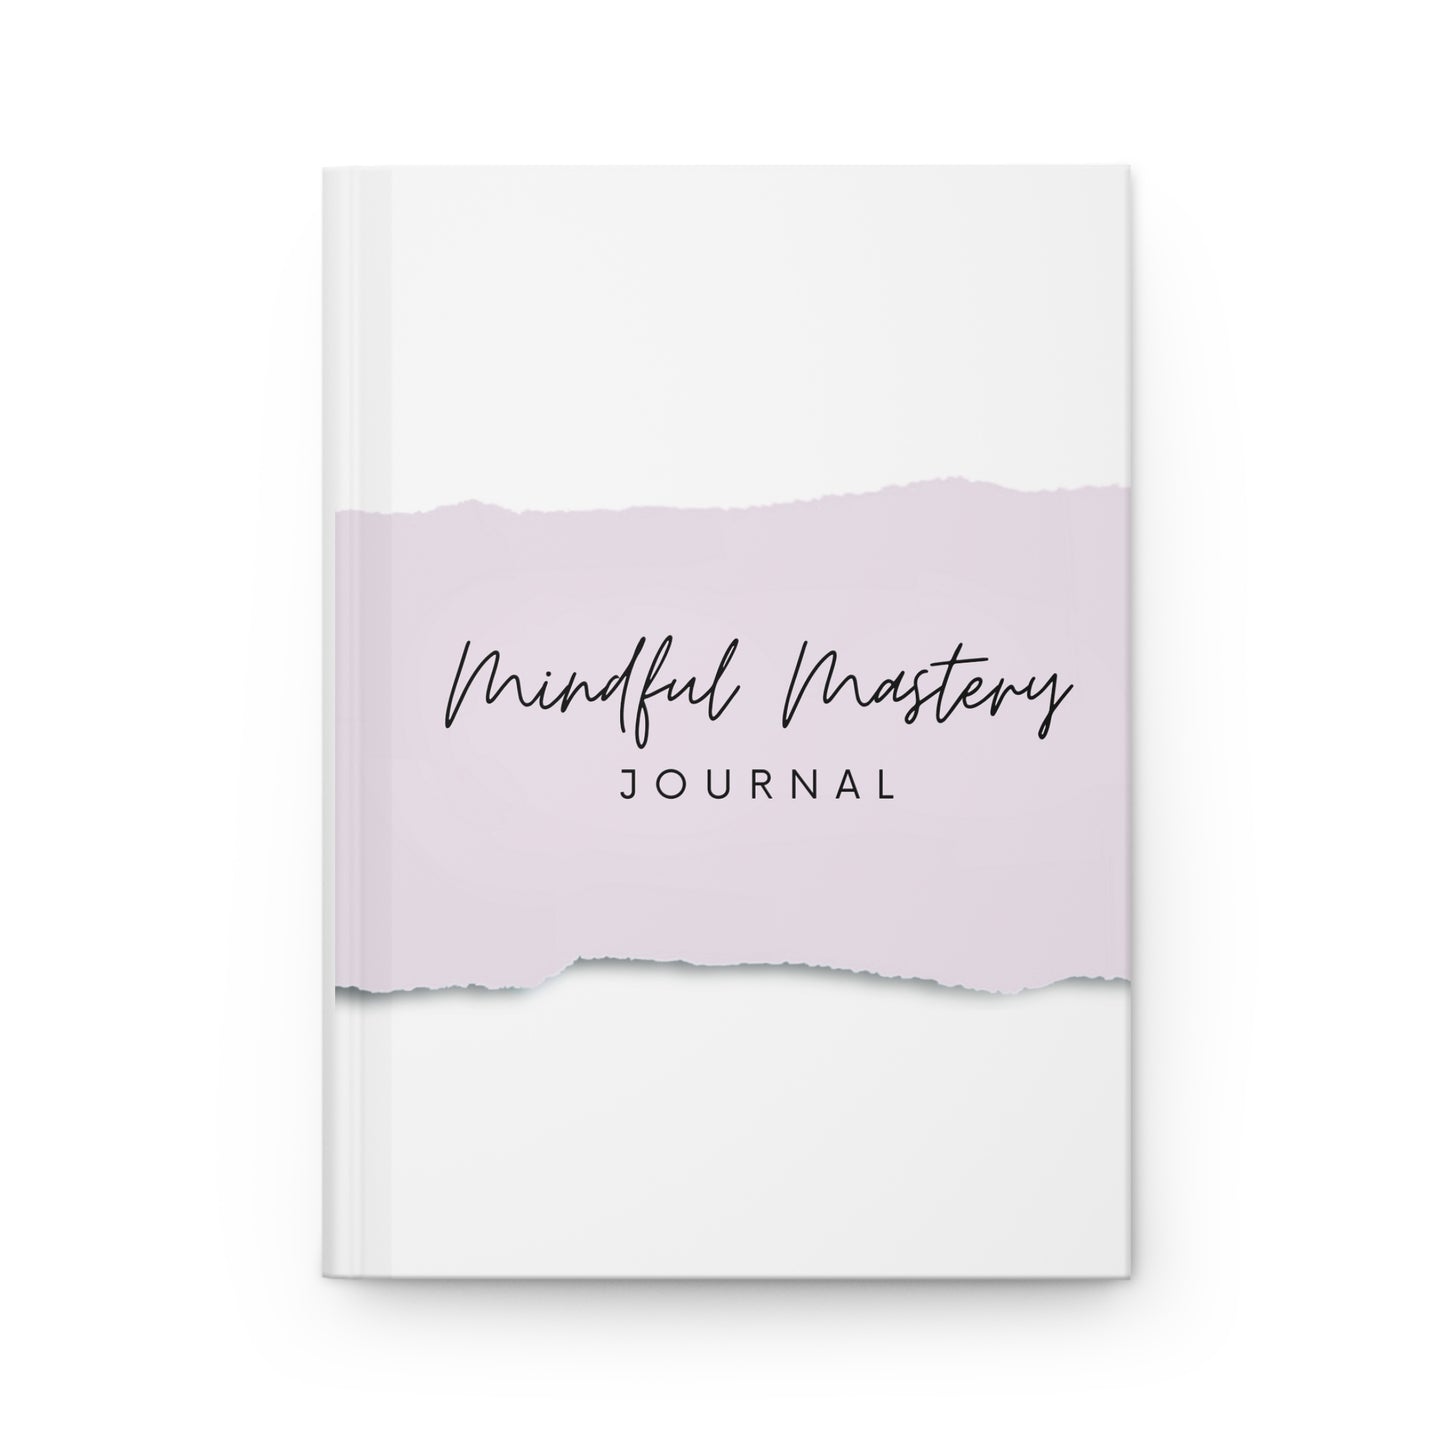 Mindful Mastery Journal - Aria